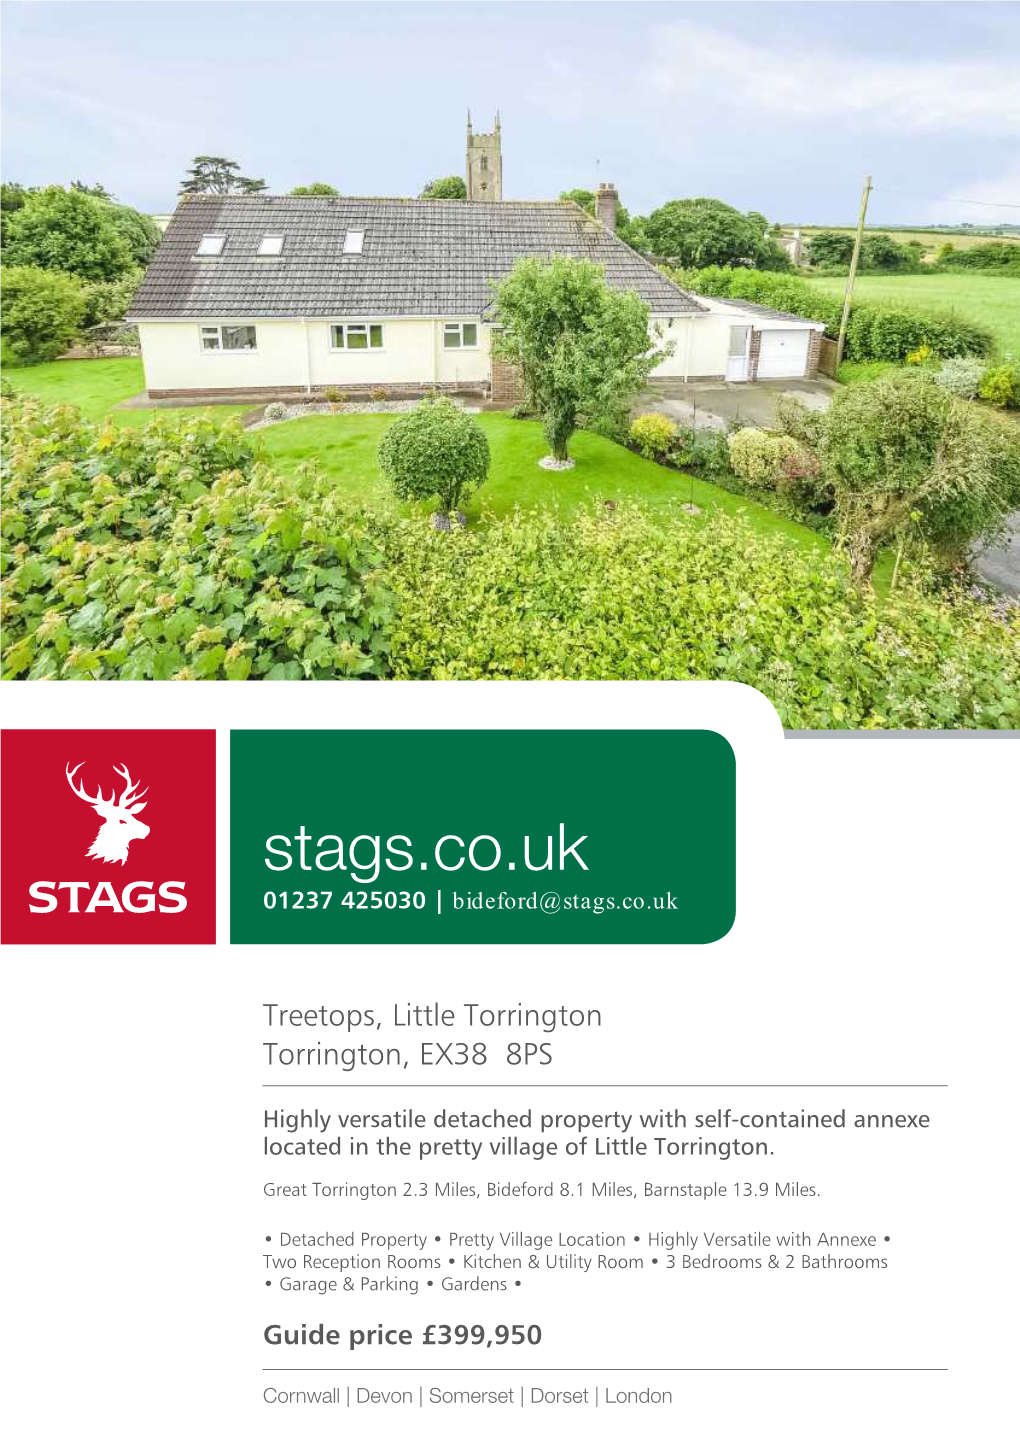 Stags.Co.Uk 01237 425030 | Bideford@Stags.Co.Uk